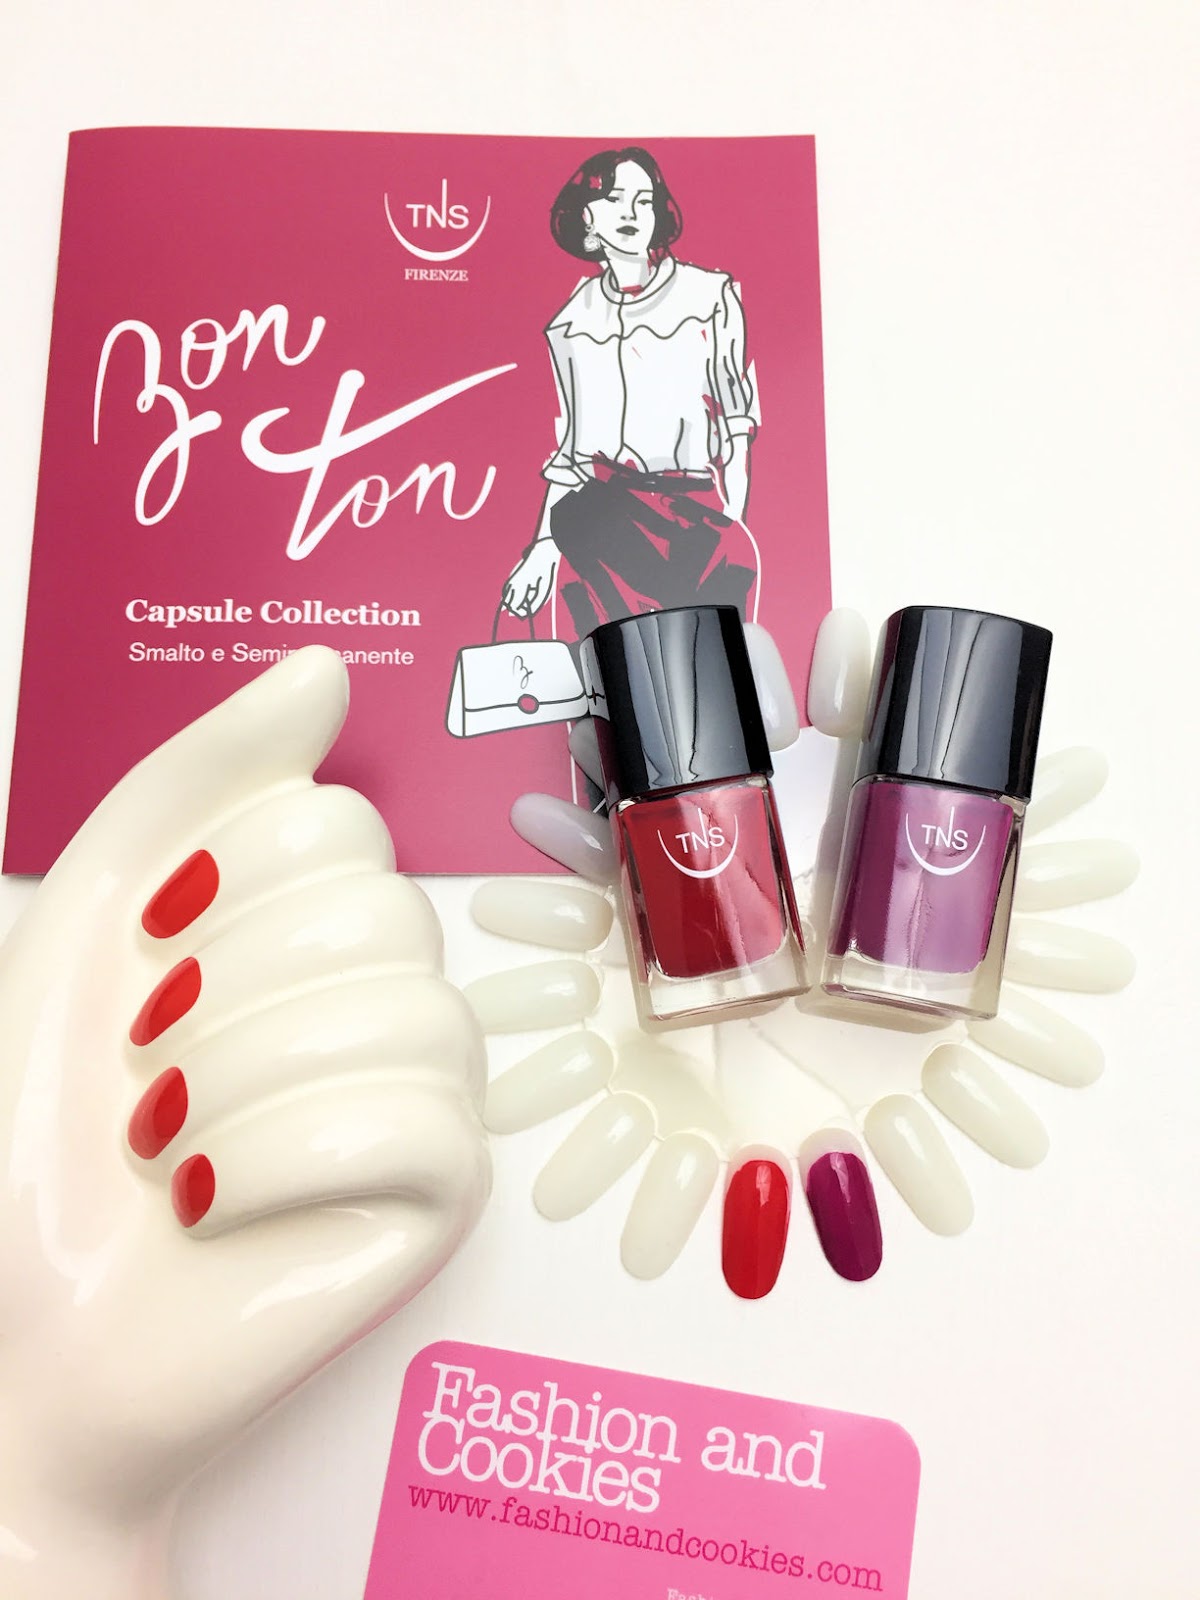 BON TON nail polish capsule collection review from TNS Firenze on Fashion and Cookies beauty blog, beauty blogger